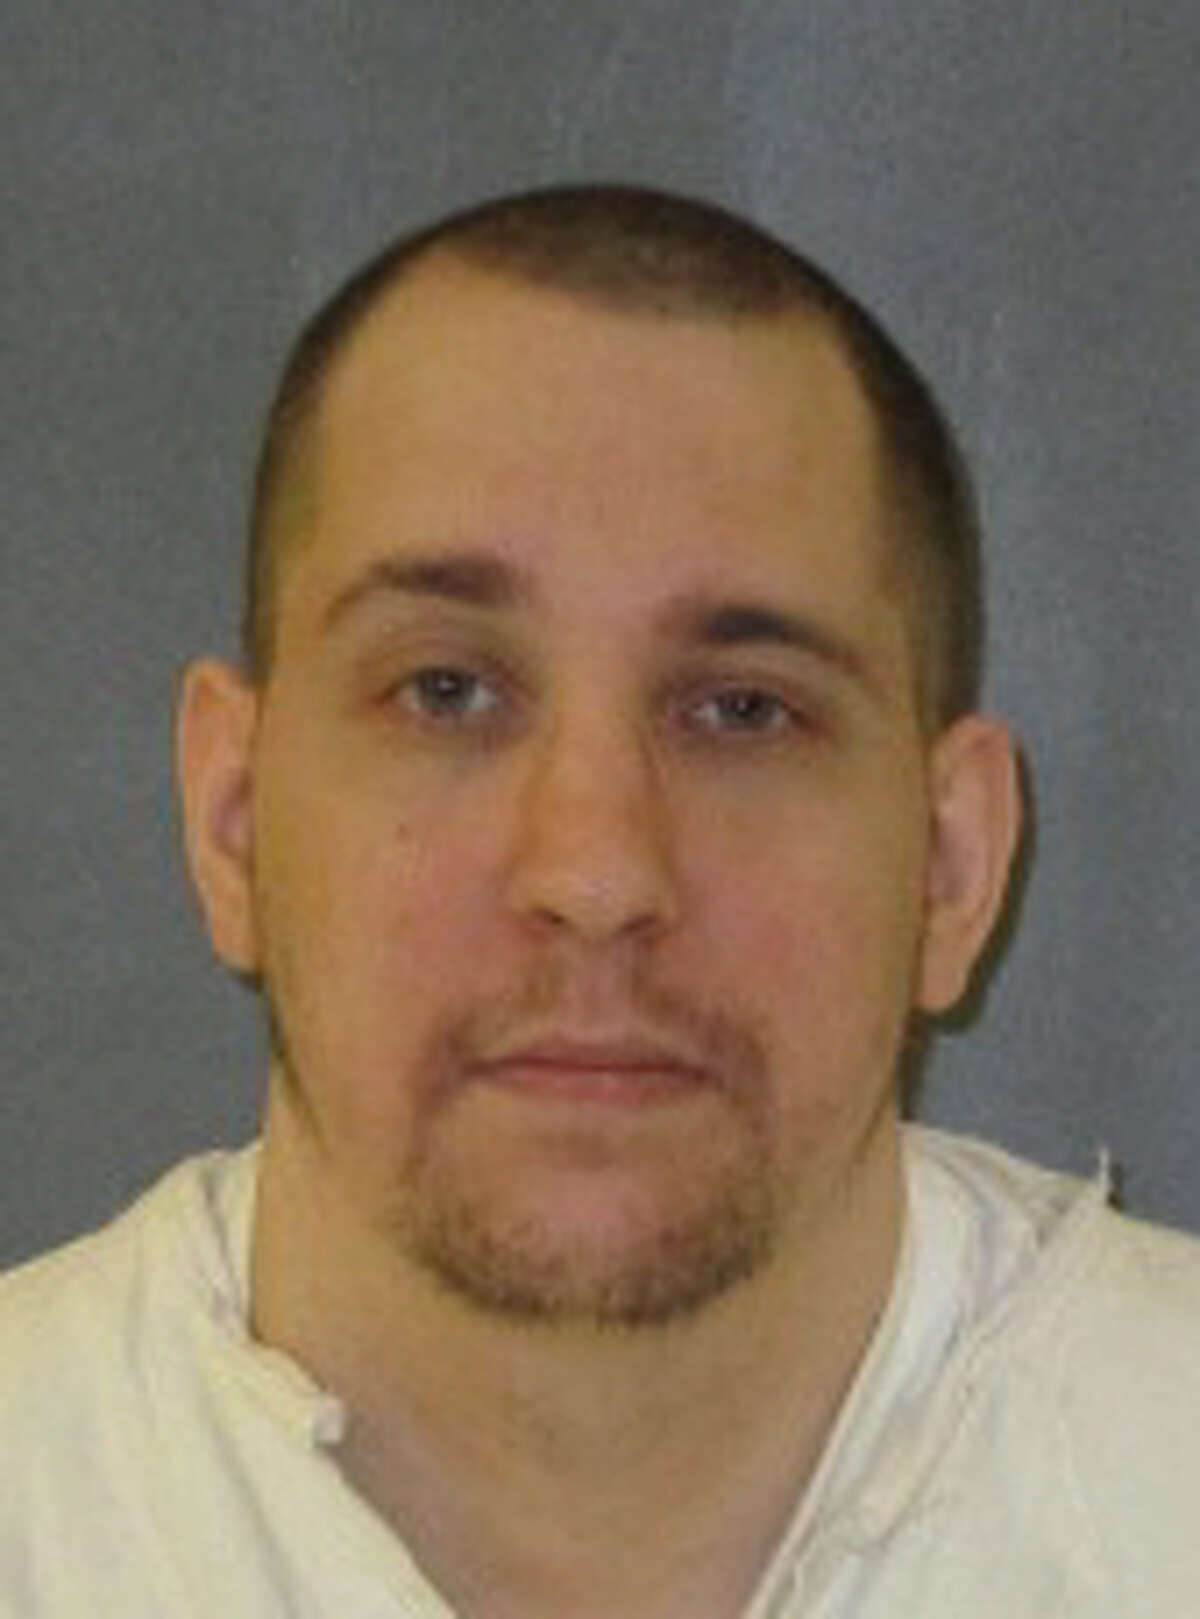 Death row inmate who stomped baby's head in Galveston asks to be executed